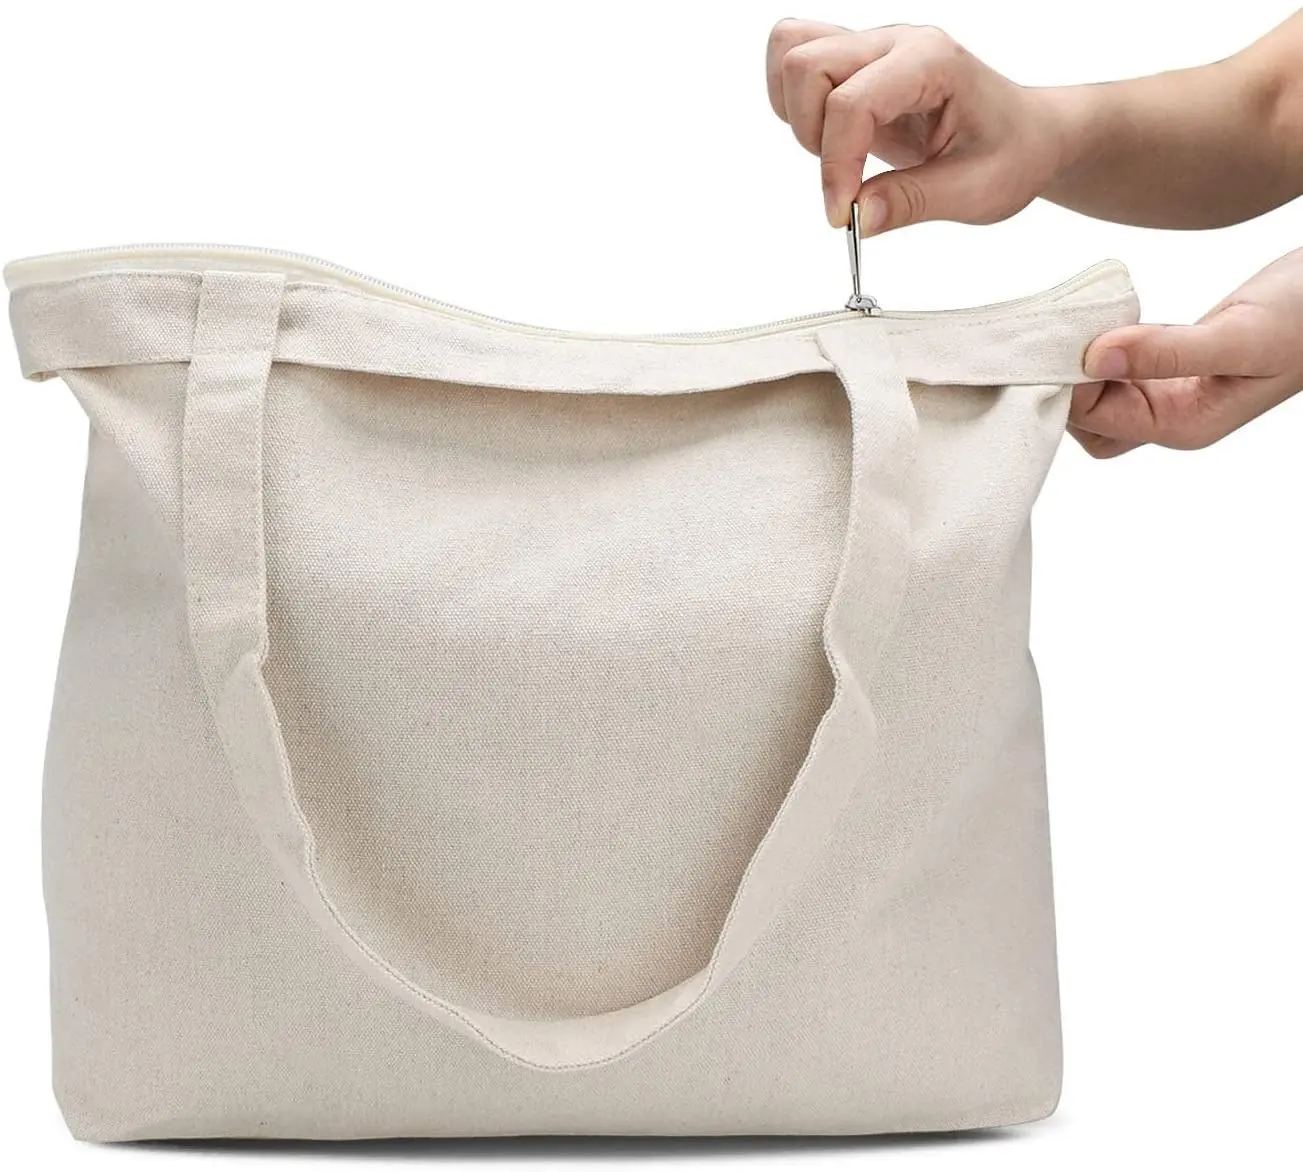 Women Canvas Bags Solid color Tote Shopping Bags Casual Cloth shoulder cotton bag With zipper For Girls Ladies Shopper